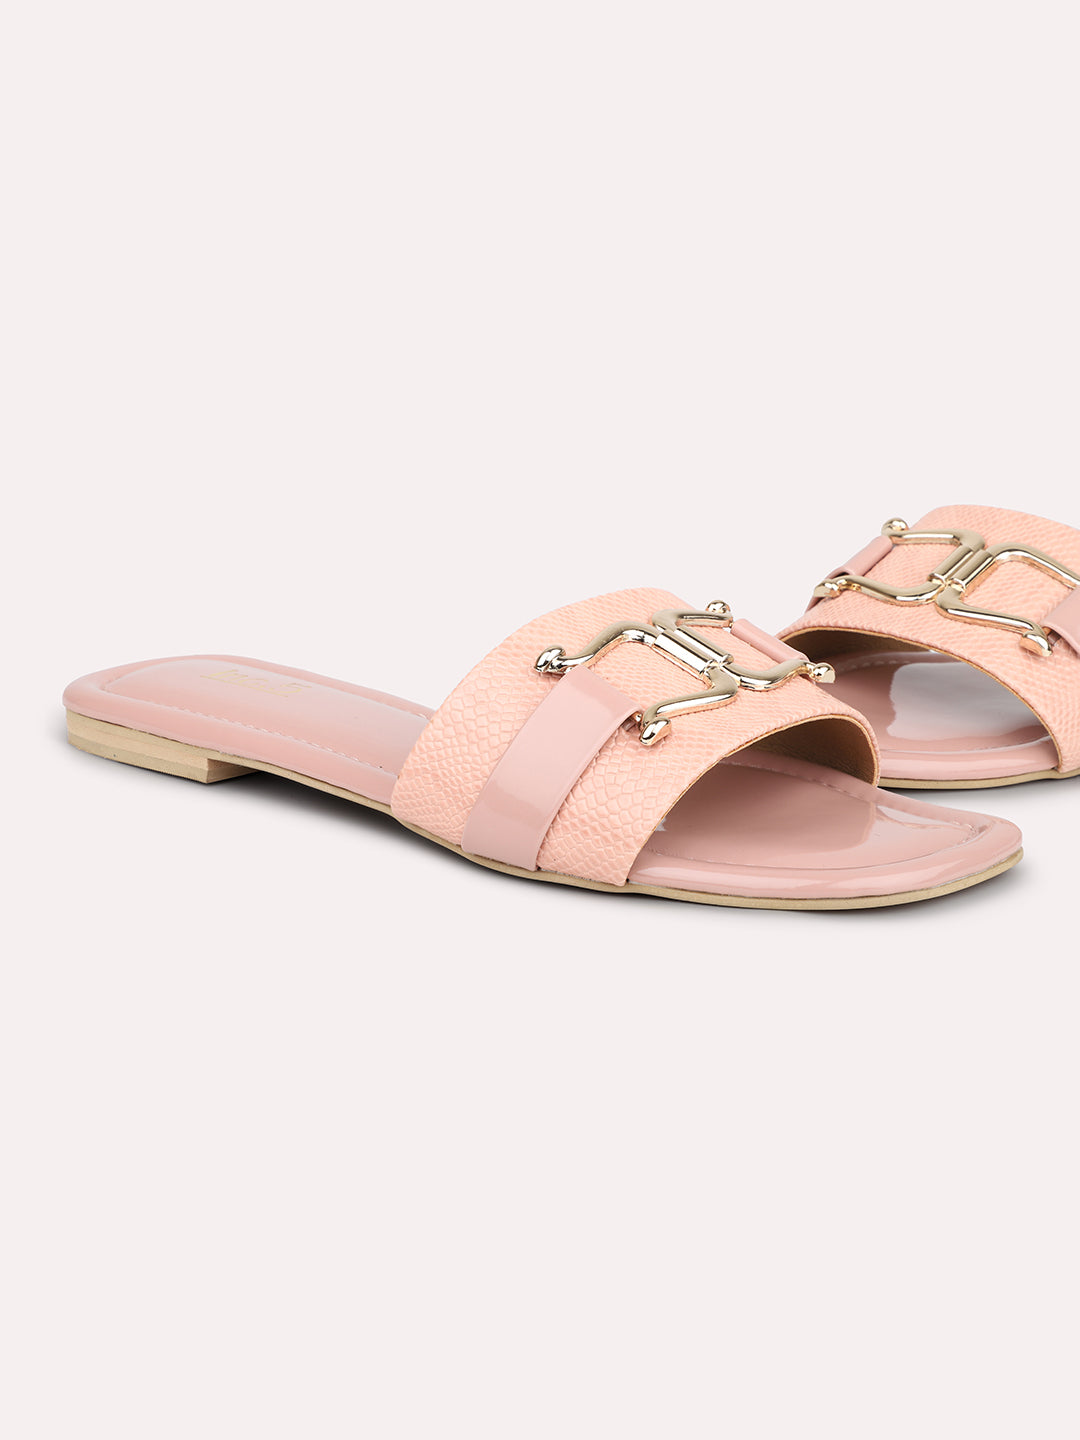 Women Peach-Coloured And Gold-Toned Buckled Open Toe Flats